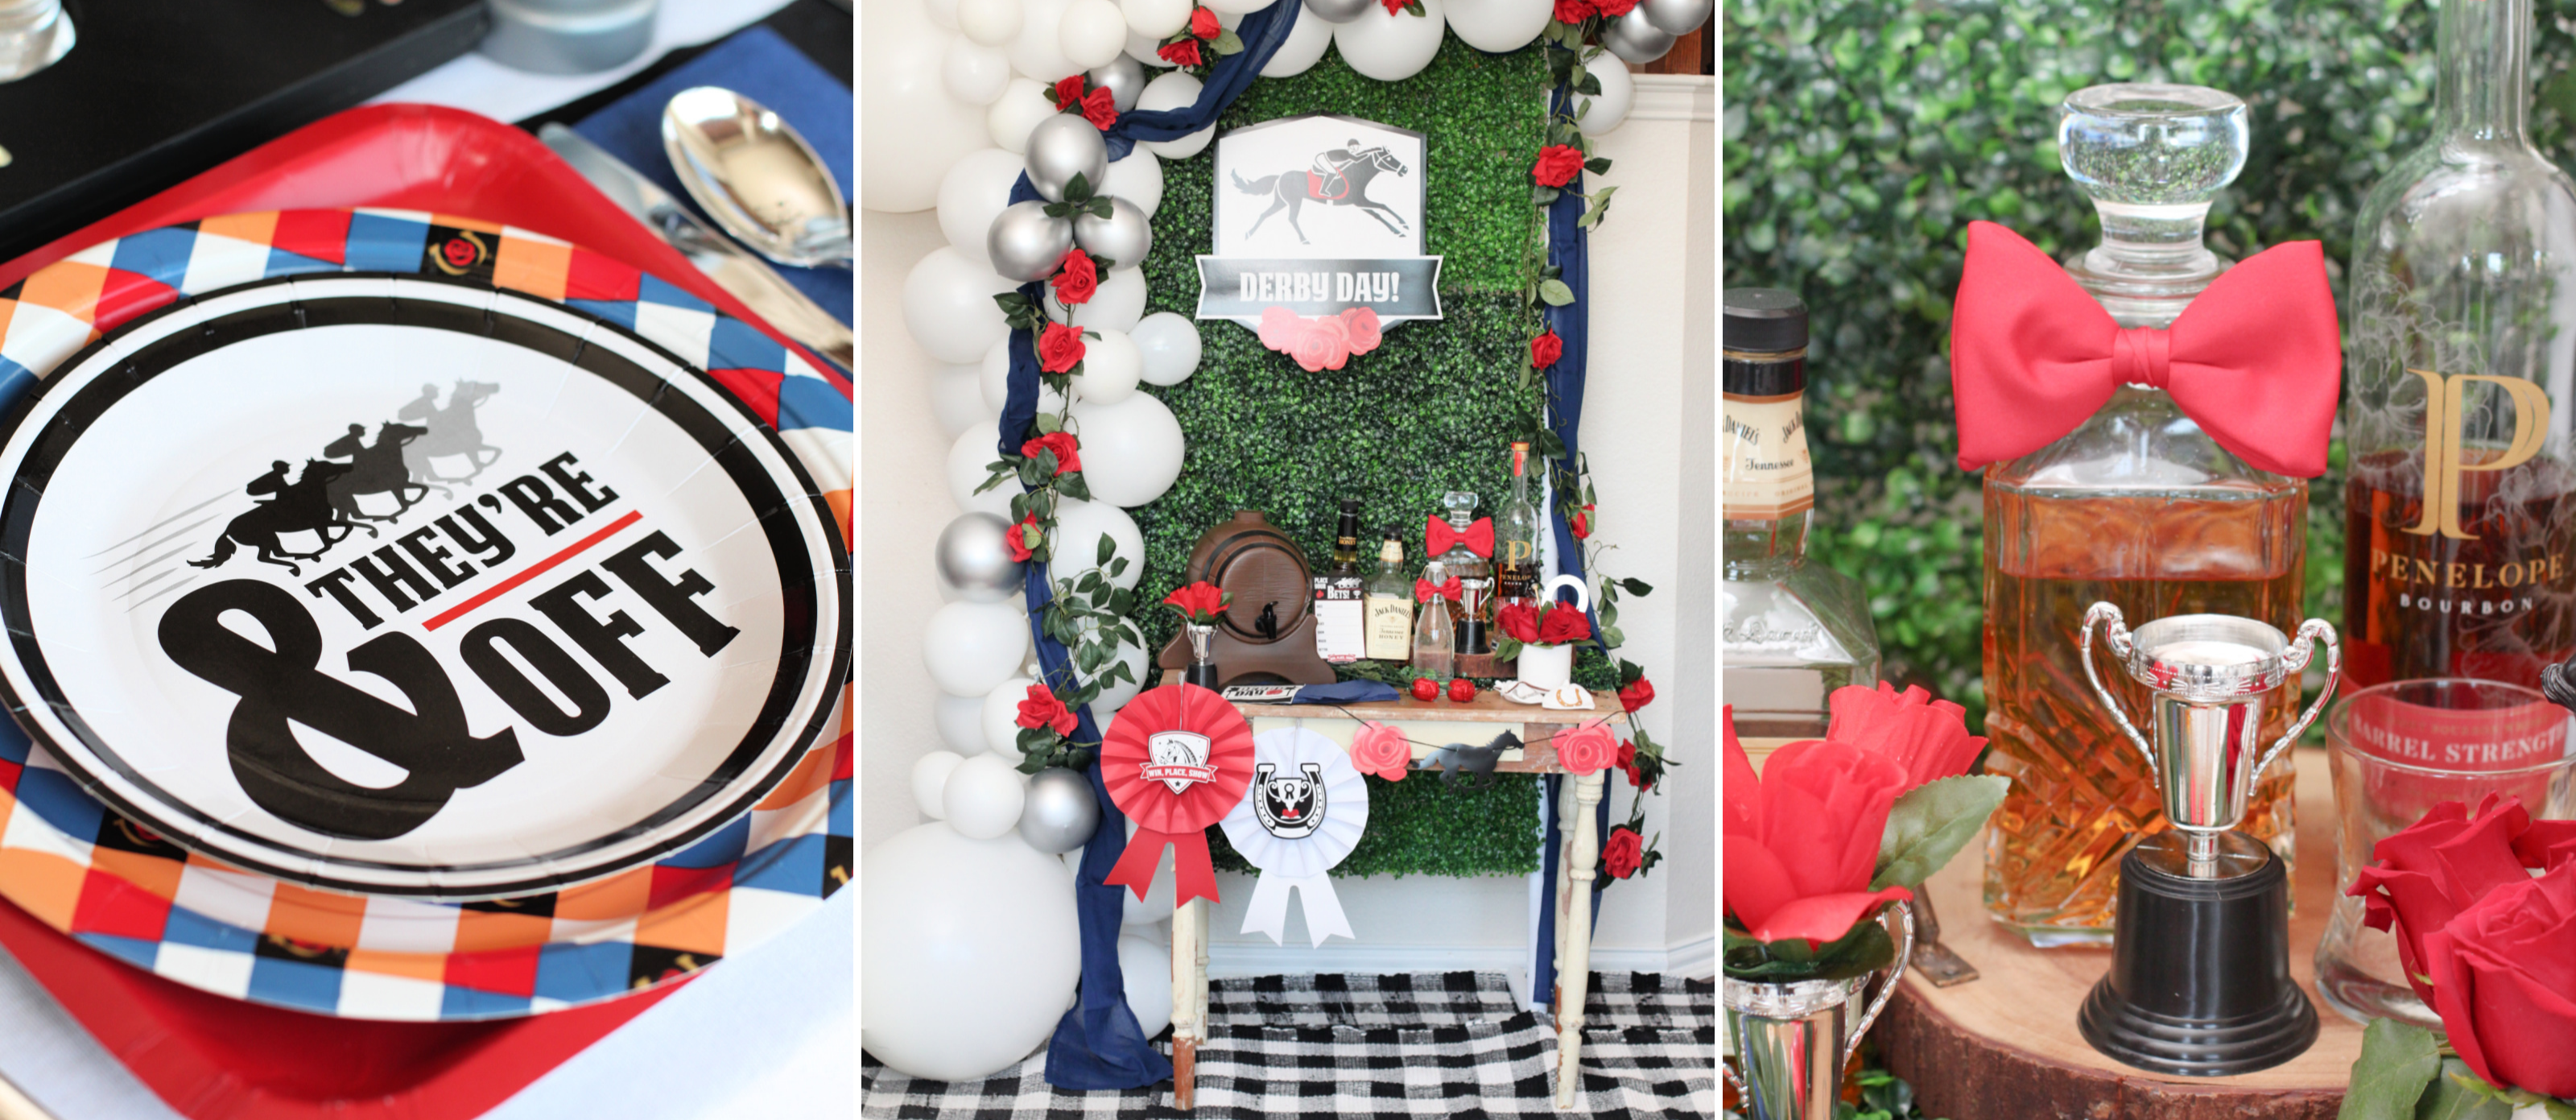 Kentucky Derby Party Ideas - Giggles Galore